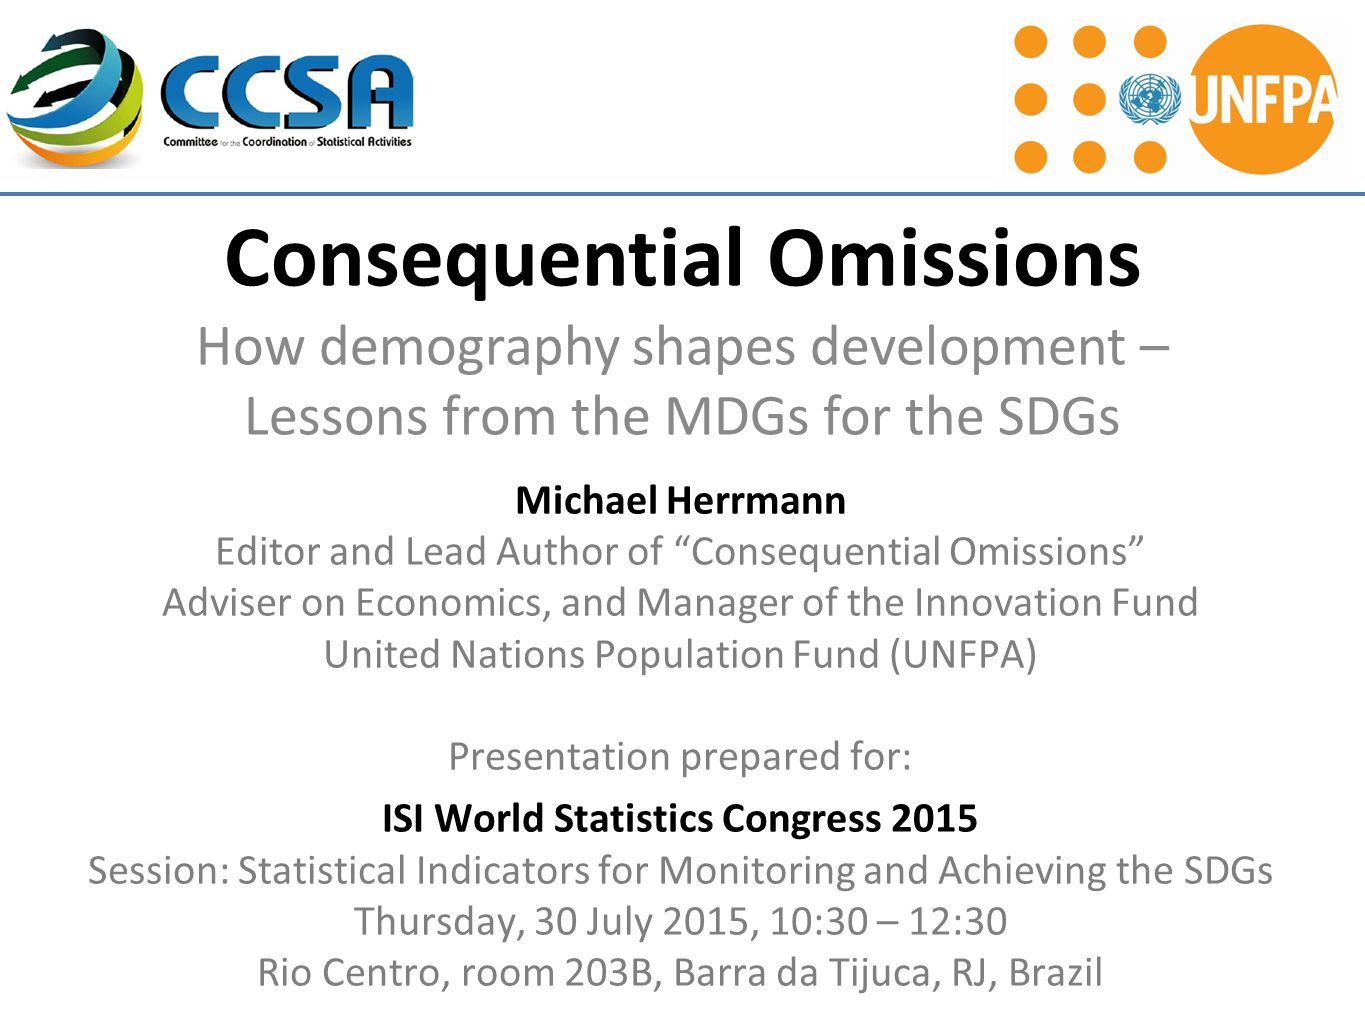 Consequential Omissions How demography shapes development – Lessons from the MDGs for the SDGs Michael Herrmann Editor and Lead Author of Consequential Omissions Adviser on Economics, and Manager of the Innovation Fund United Nations Population Fund (UNFPA) Presentation prepared for: ISI World Statistics Congress 2015 Session: Statistical Indicators for Monitoring and Achieving the SDGs Thursday, 30 July 2015, 10:30 – 12:30 Rio Centro, room 203B, Barra da Tijuca, RJ, Brazil